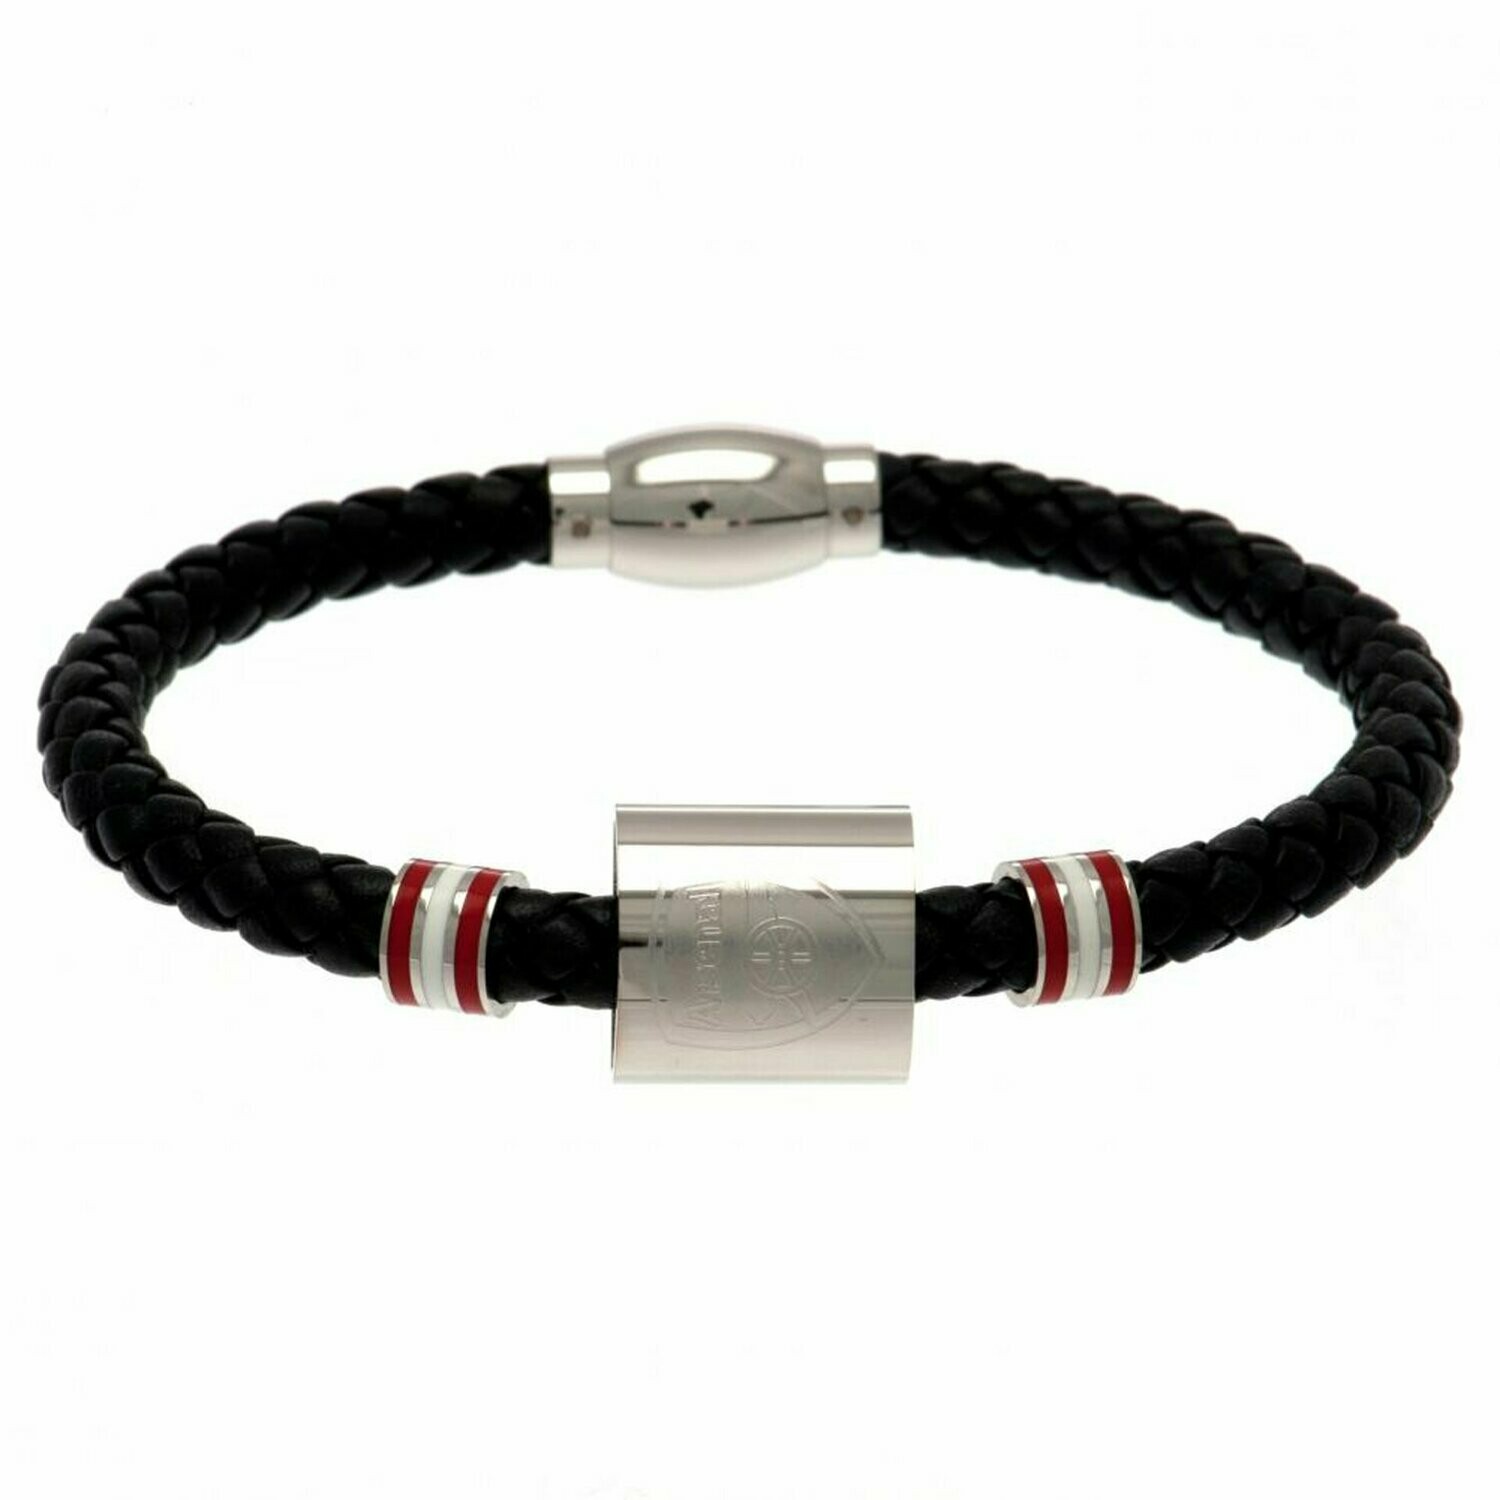 Official Arsenal Stainless Steel/Leather Hoop Crest Bracelet